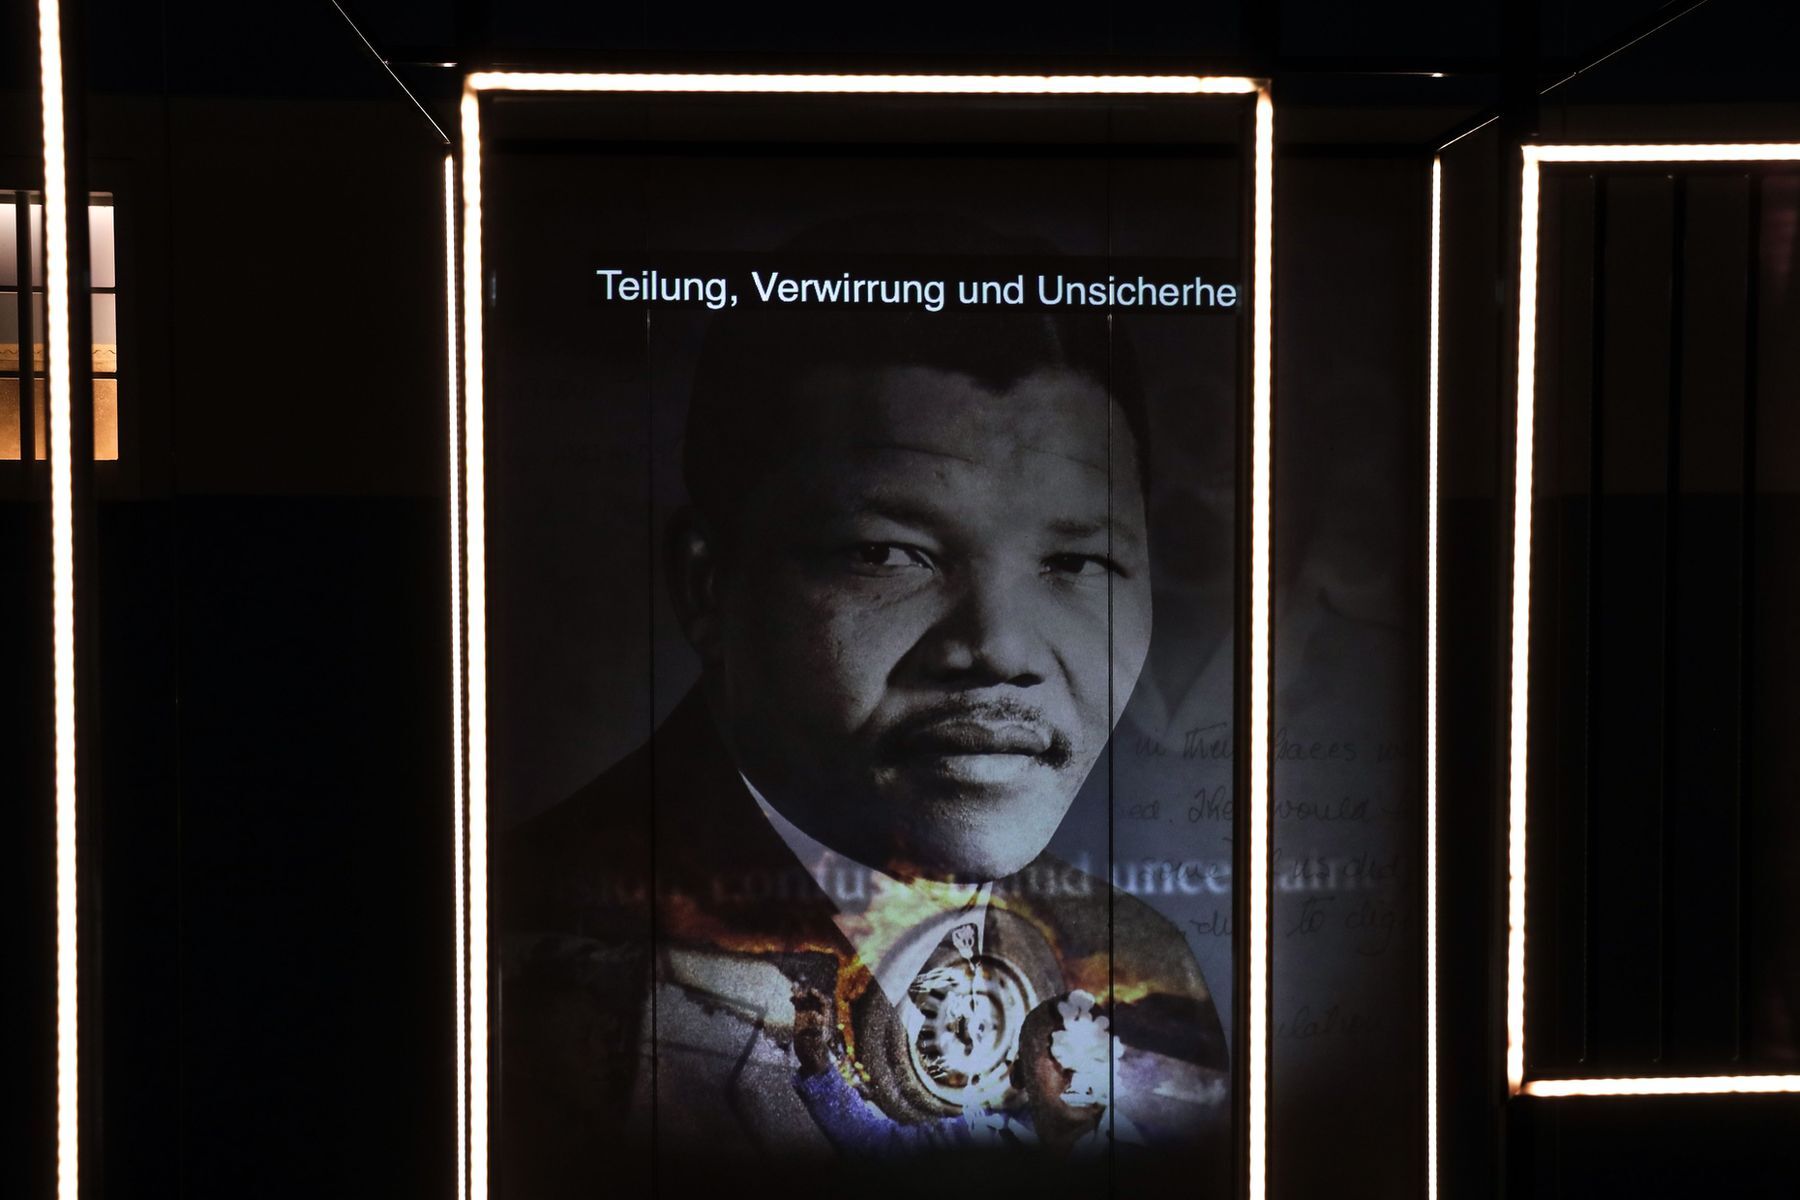 <p>Already considered a hero by his people, Mandela gradually gained prominence outside the country during his long incarceration, becoming the <a href="https://news.un.org/en/story/2022/07/1122752" rel="noreferrer noopener">emblematic figure of the anti-racist struggle</a>. Condemnations of apartheid grew, culminating in 1988 with an <a href="https://www.aamarchives.org/archive/video/music/vid001-mandela-concert-at-wembley-1988.html" rel="noreferrer noopener">11-hour concert at London’s Wembley Stadium</a>. The day’s biggest artists called for Mandela’s release before half a billion viewers around the world.</p>